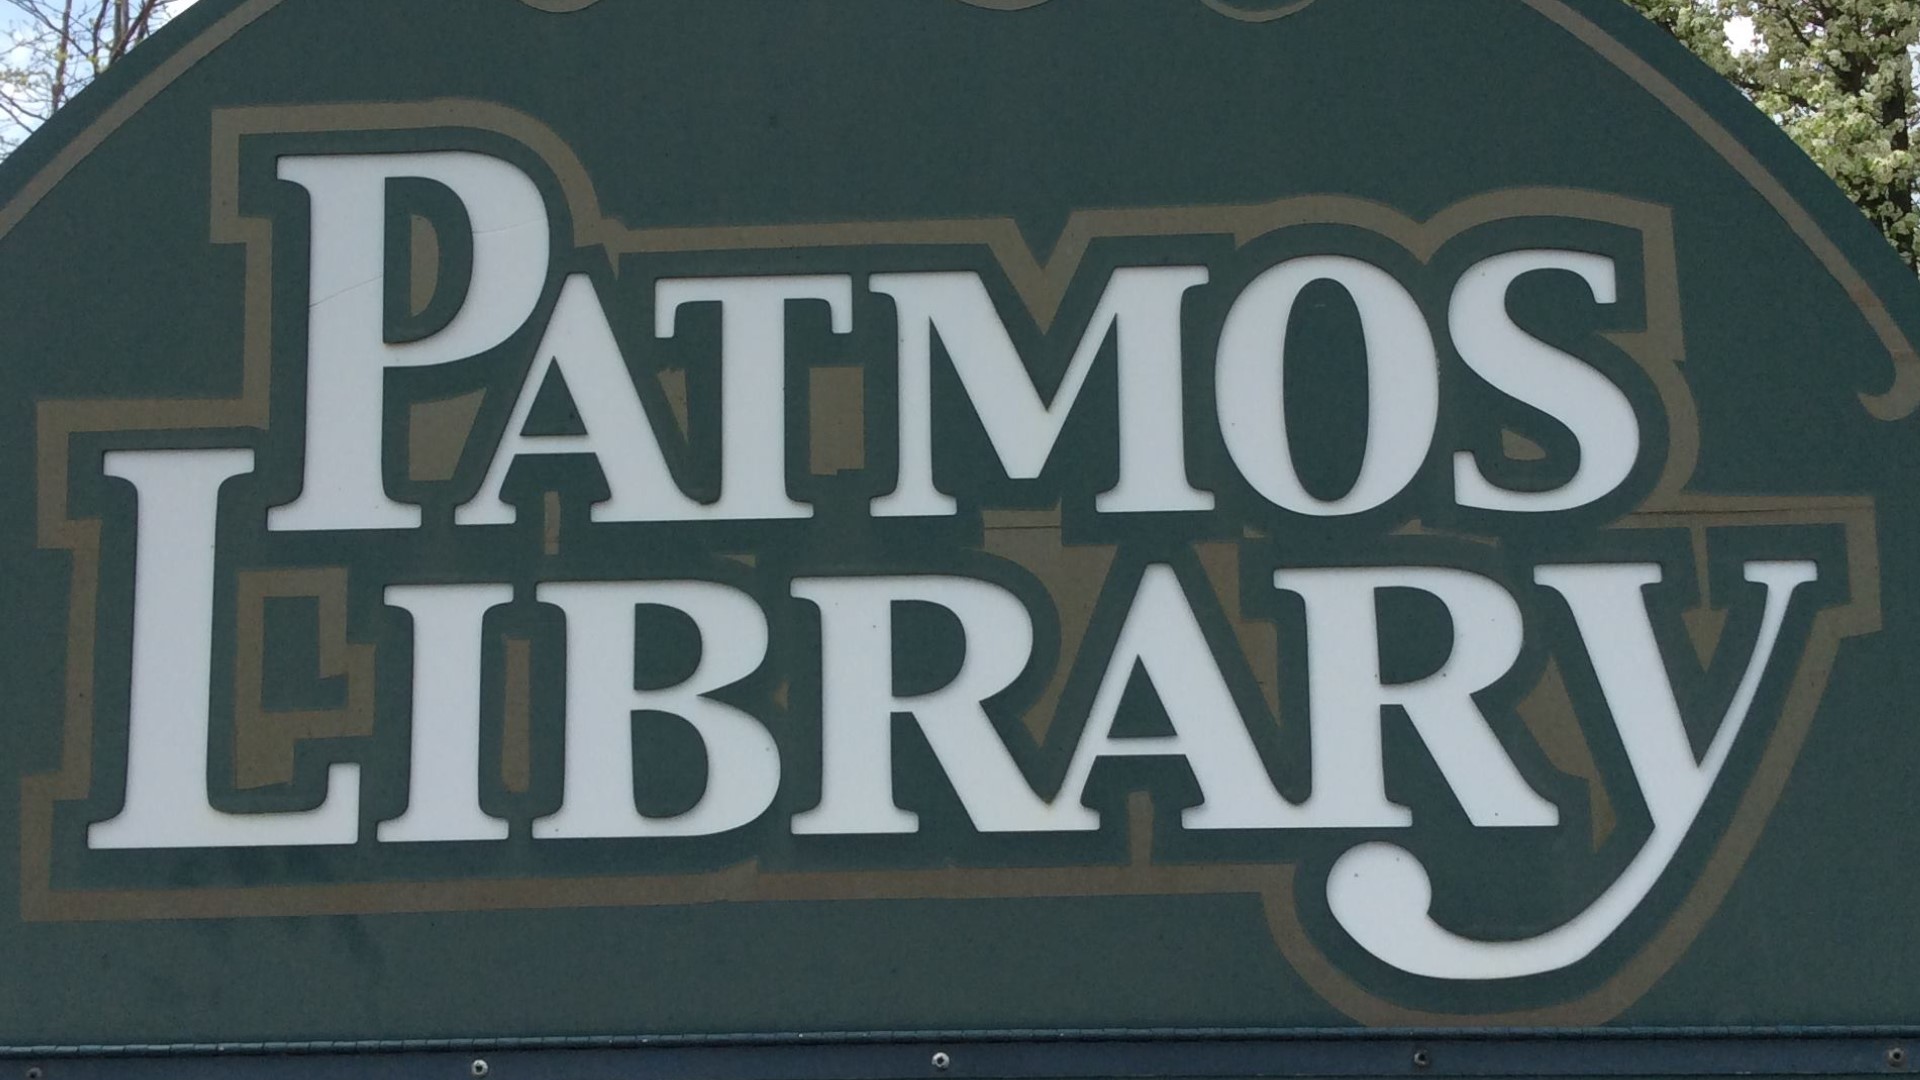 The board of the Patmos Library in Ottawa County held a special meeting this morning to once again discuss a millage proposal after it failed on primary election day